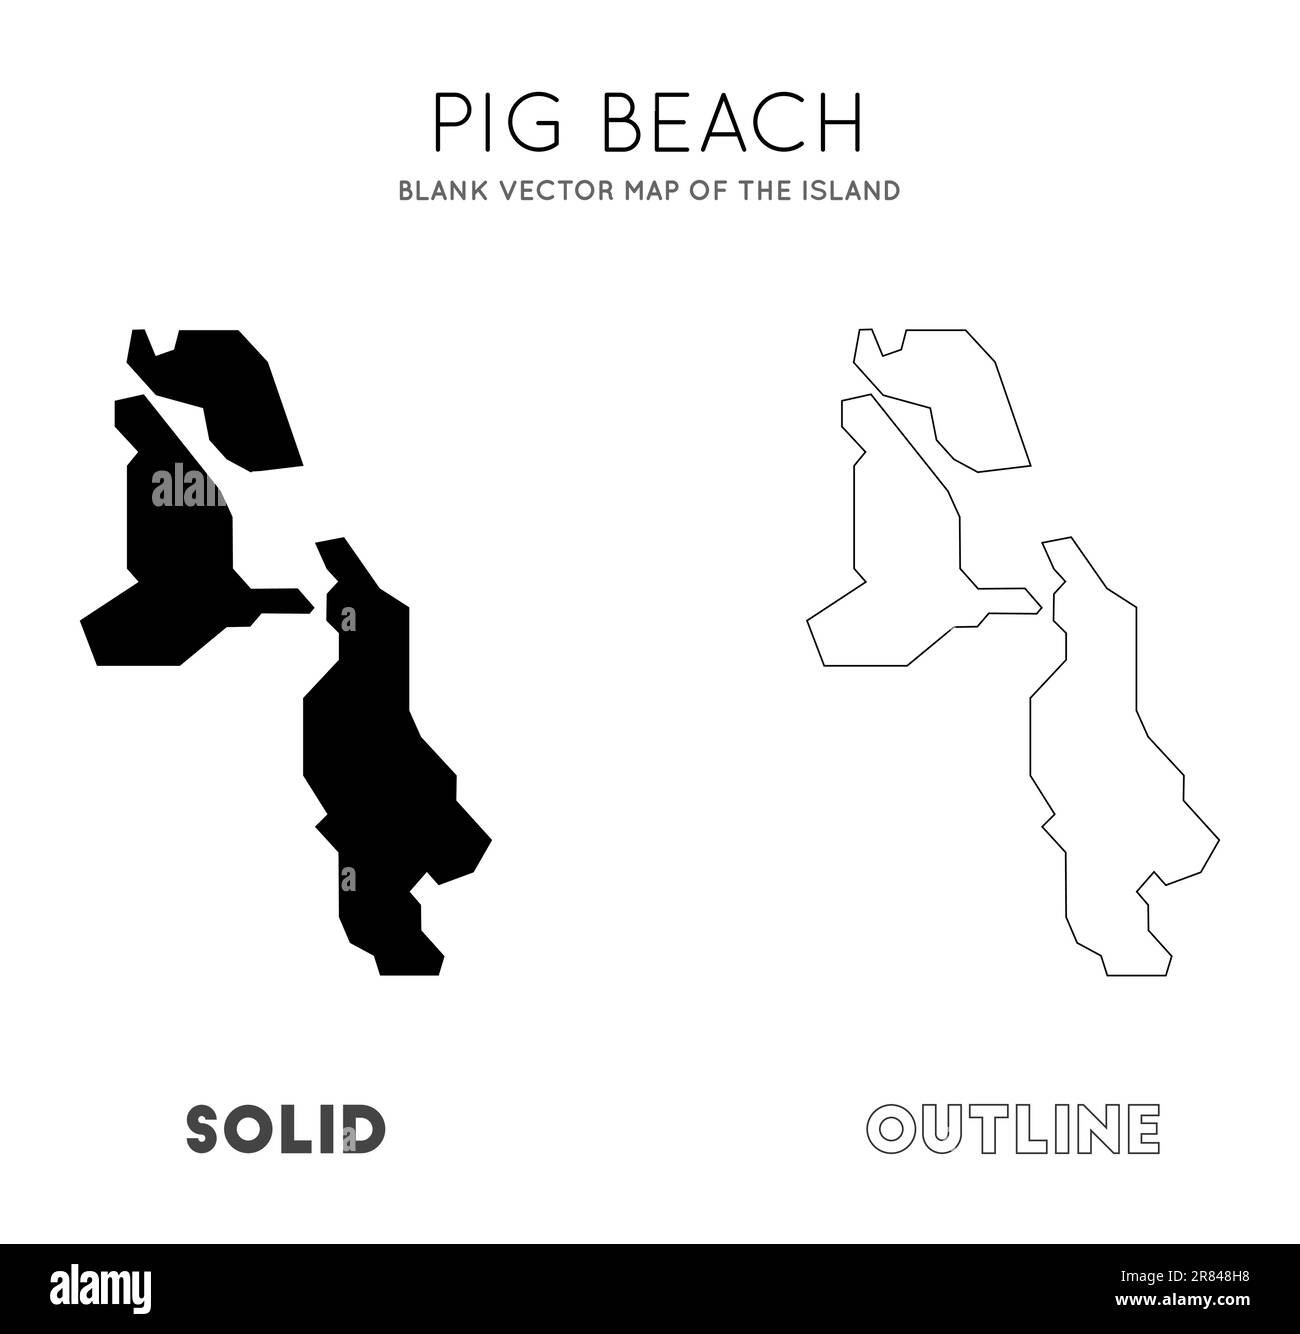 Pig Beach map. Blank vector map of the Island. Borders of Pig Beach for your infographic. Vector illustration. Stock Vector